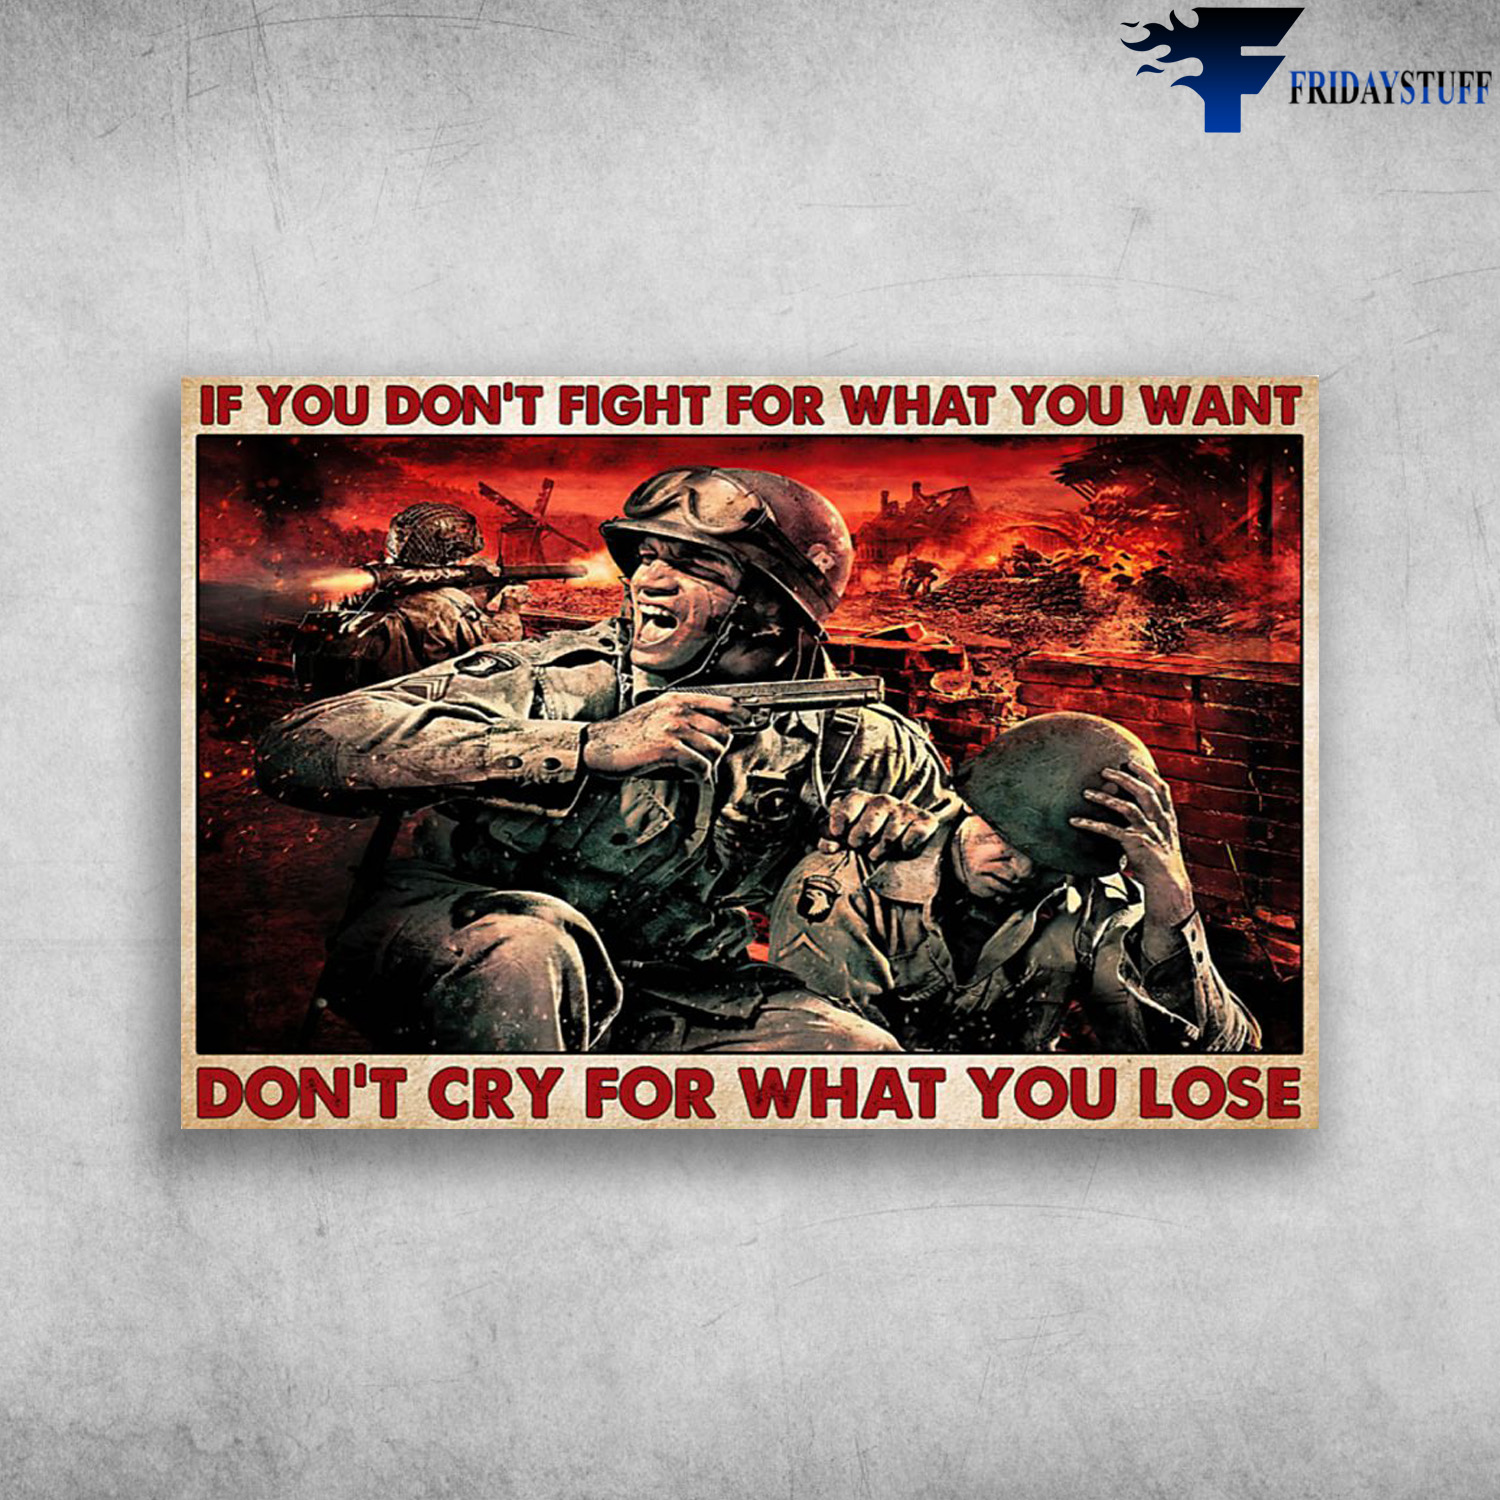 Soldier On The Battlefield - If You Don't Fight For What You Want, Don't Cry For What You Lose